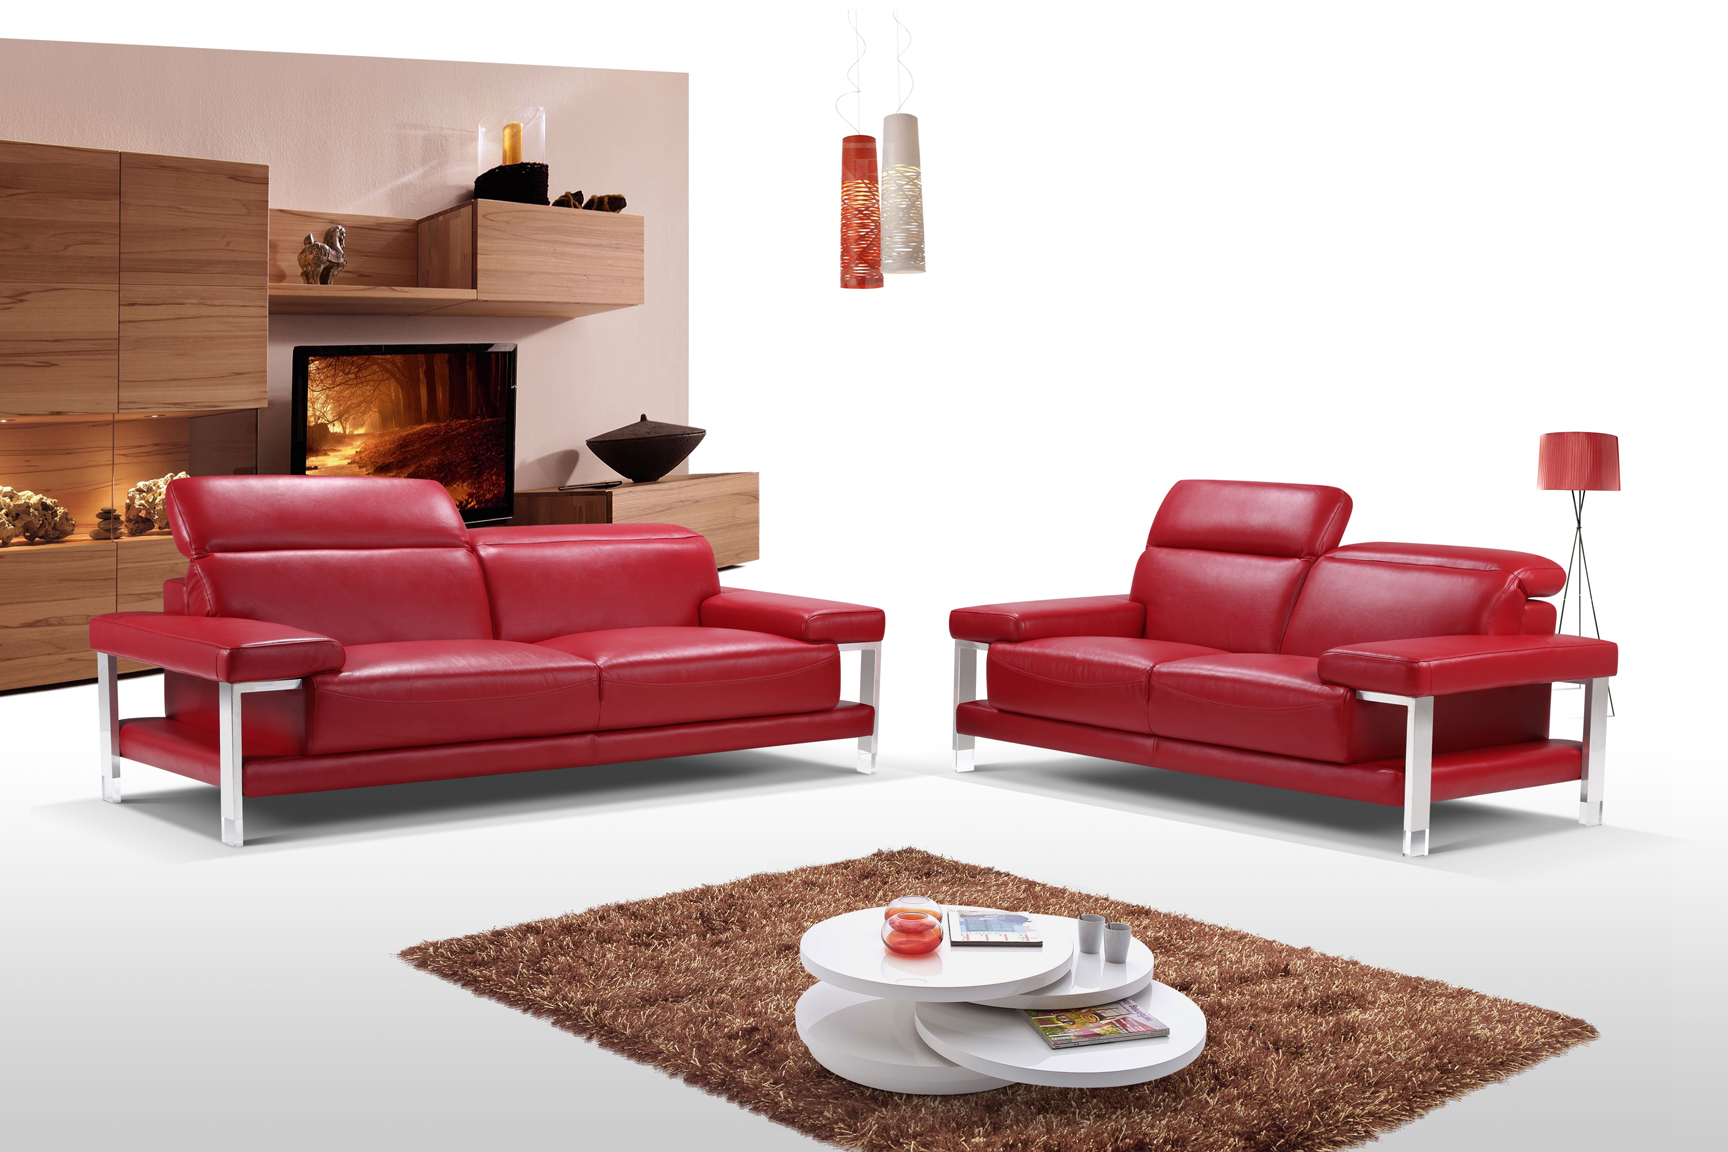 Simple Red Leather Living Room Furniture for Small Space